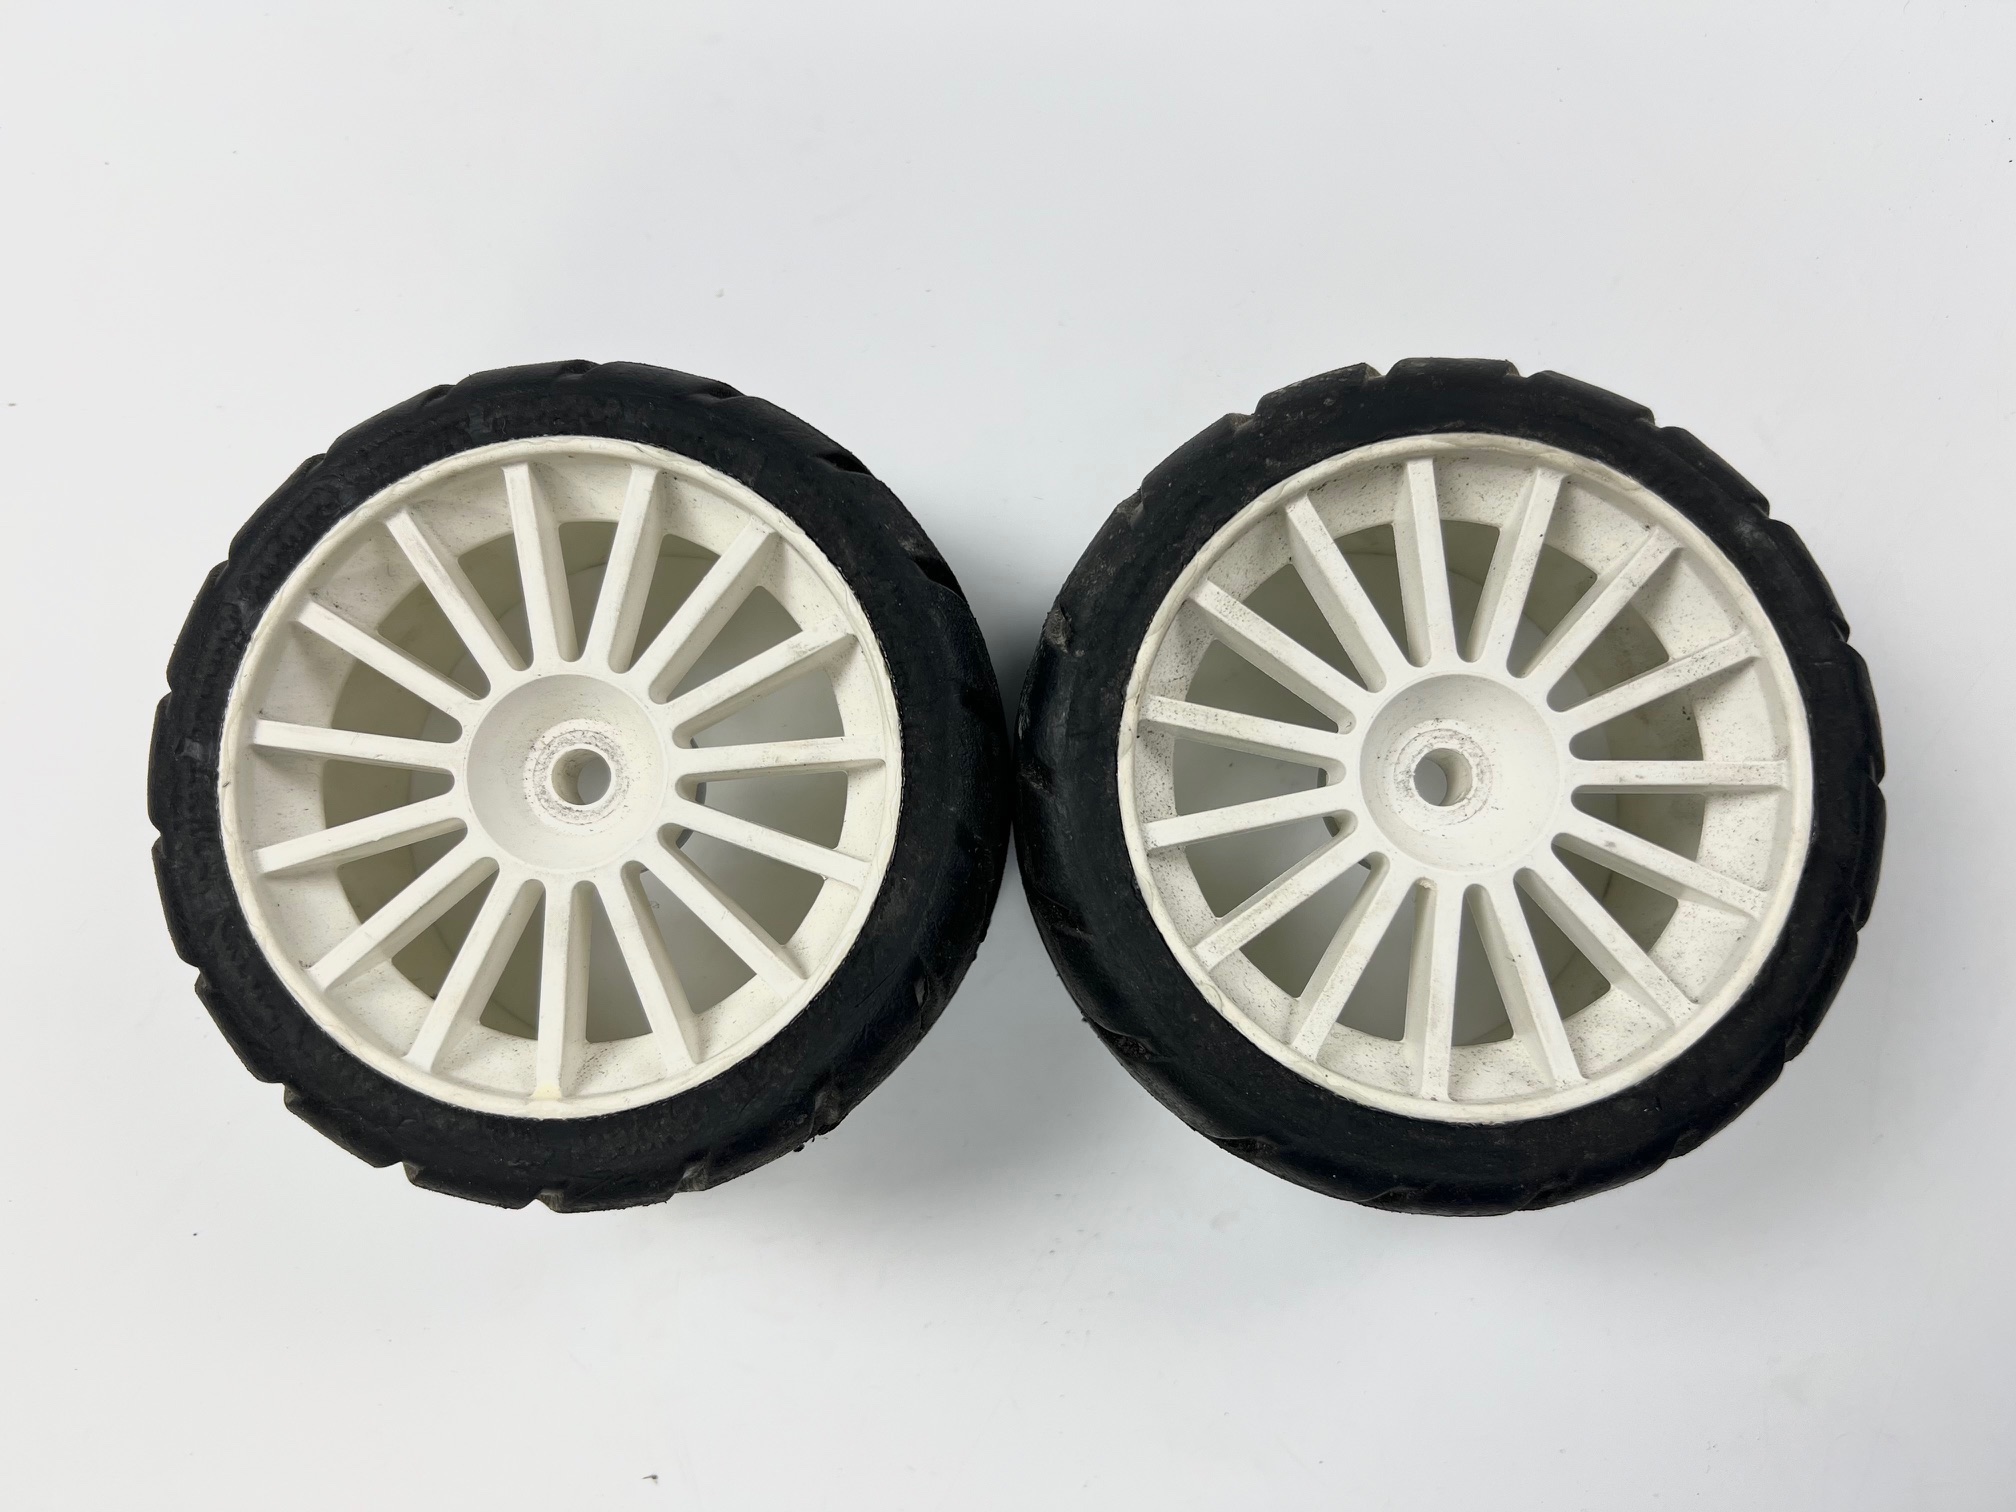 GRP B tyres on ATS rims 18 mm square, used "17"